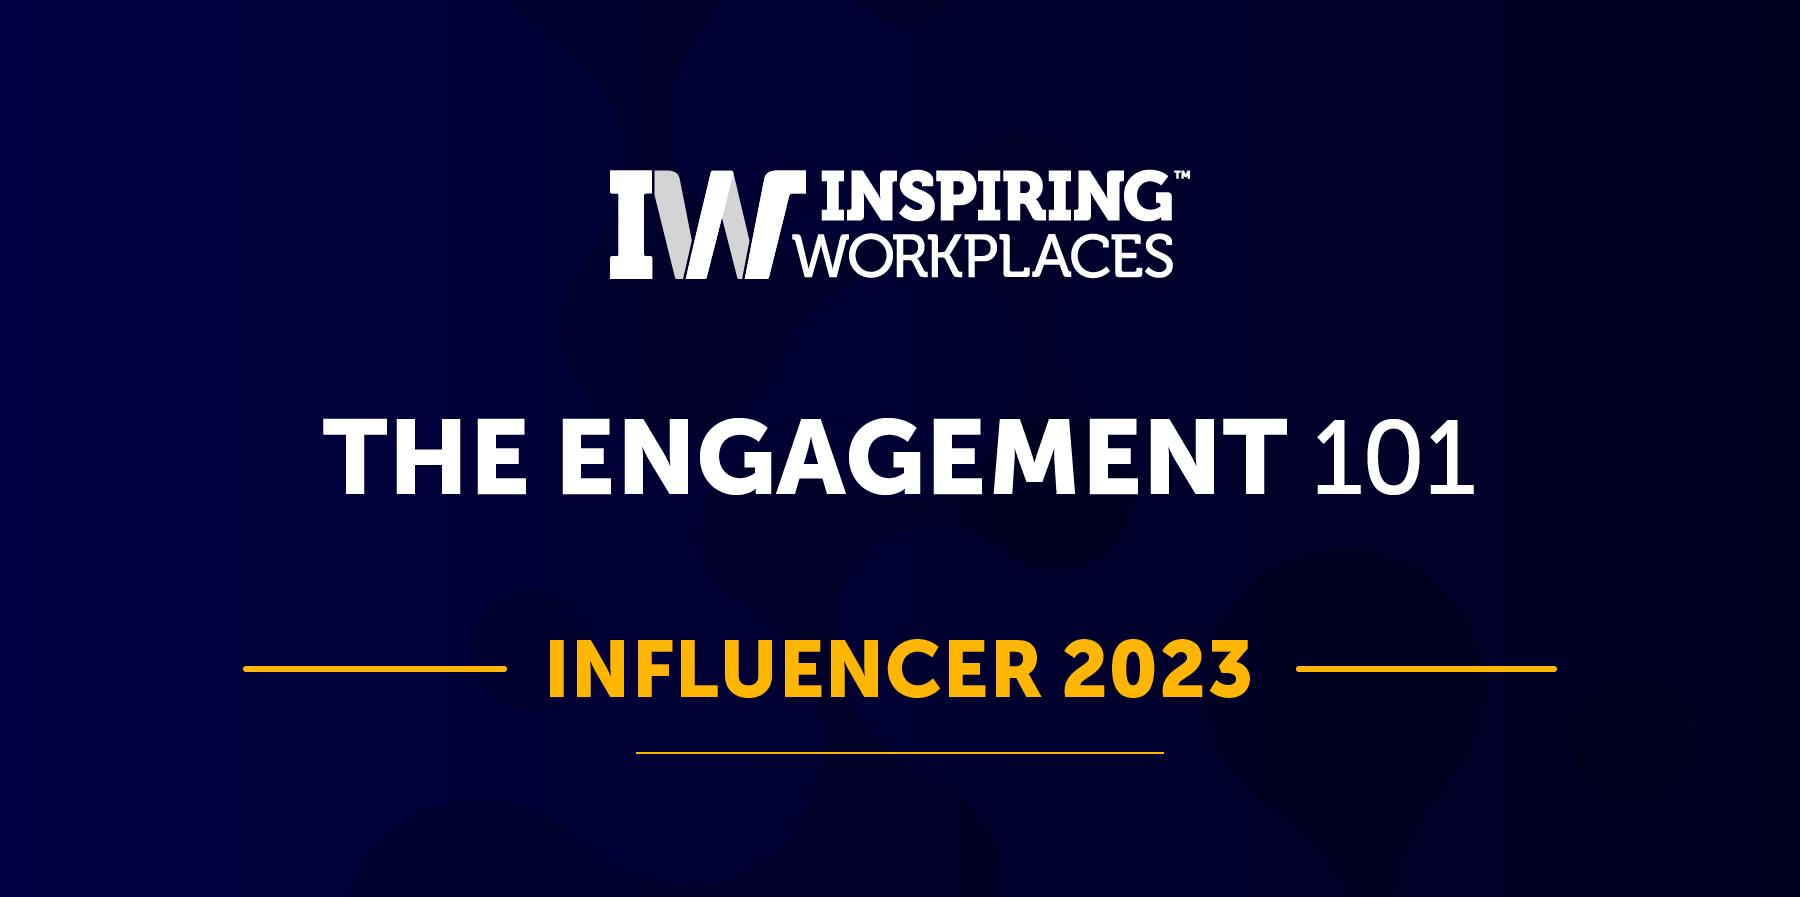 Inspiring Workplaces The Engagement 101 Influencer 2023